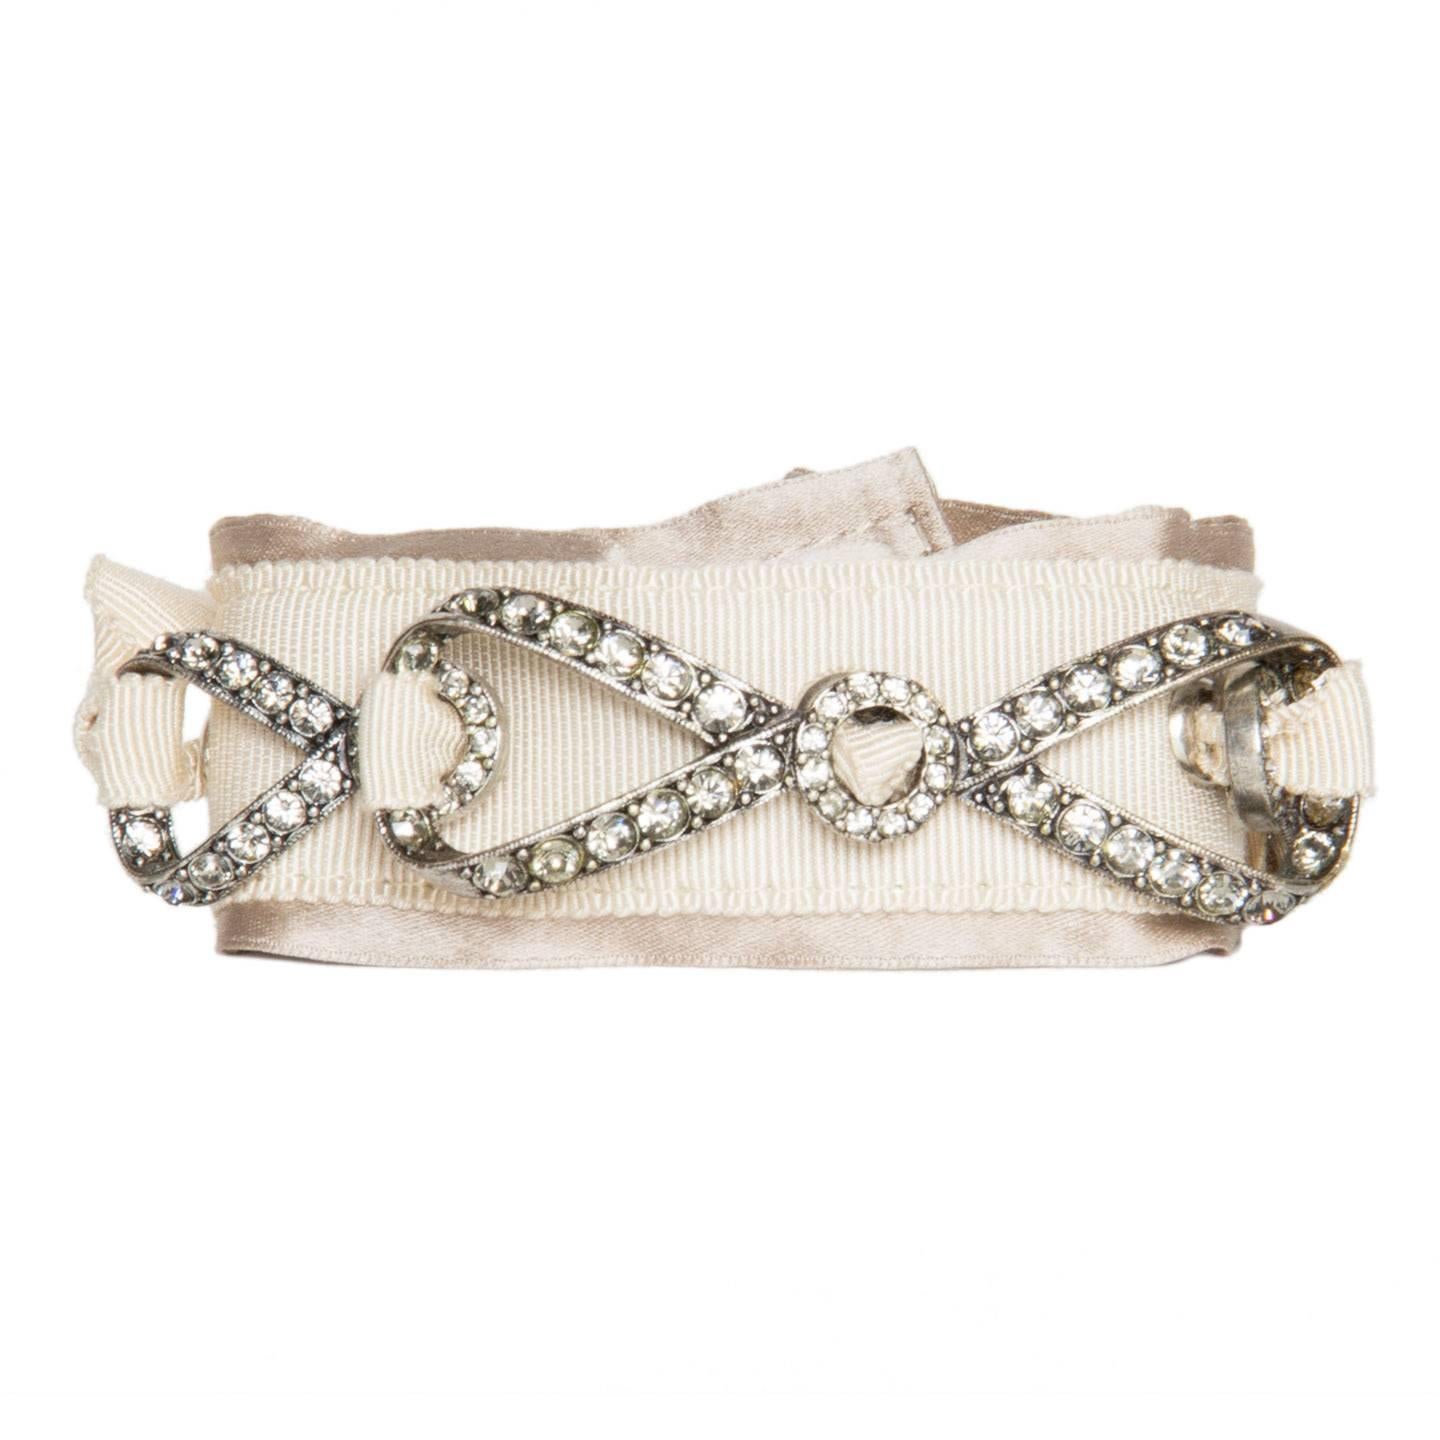 Lanvin Ribbons & Crystals Bracelet In Excellent Condition For Sale In Brooklyn, NY